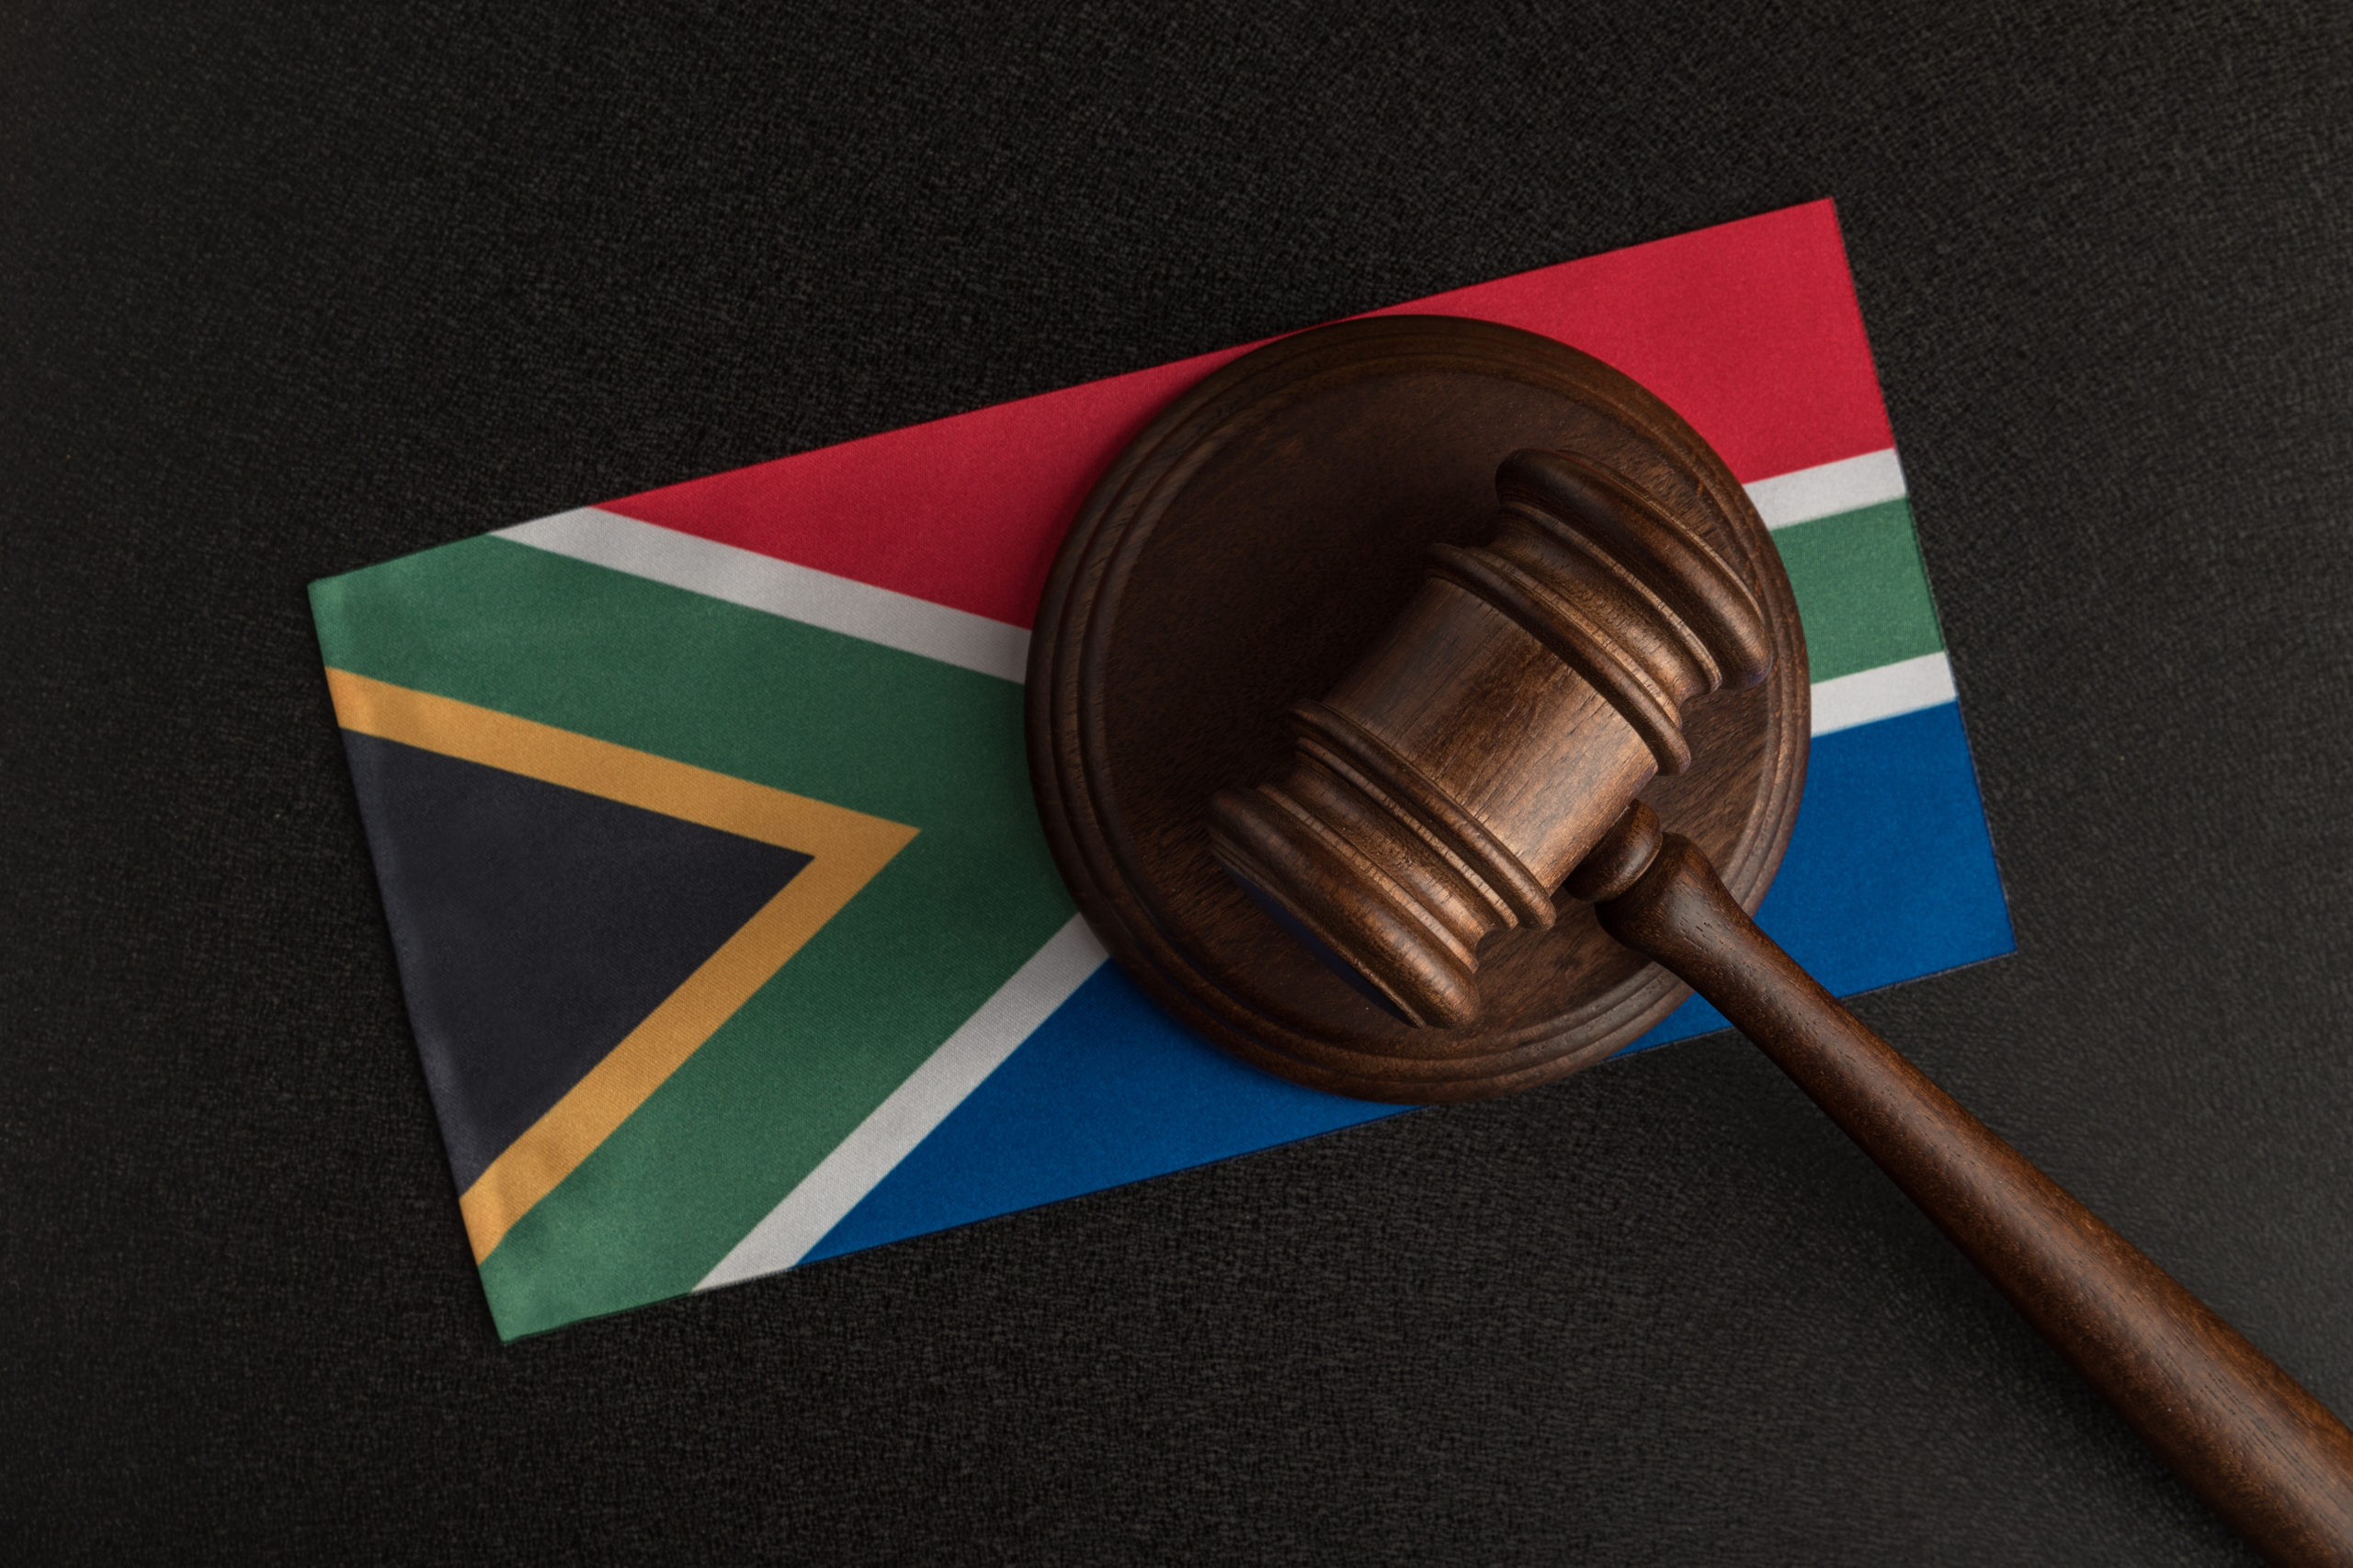 The Effect of Zuma’s Imprisonment on South Africa’s Institutions and Rule of Law